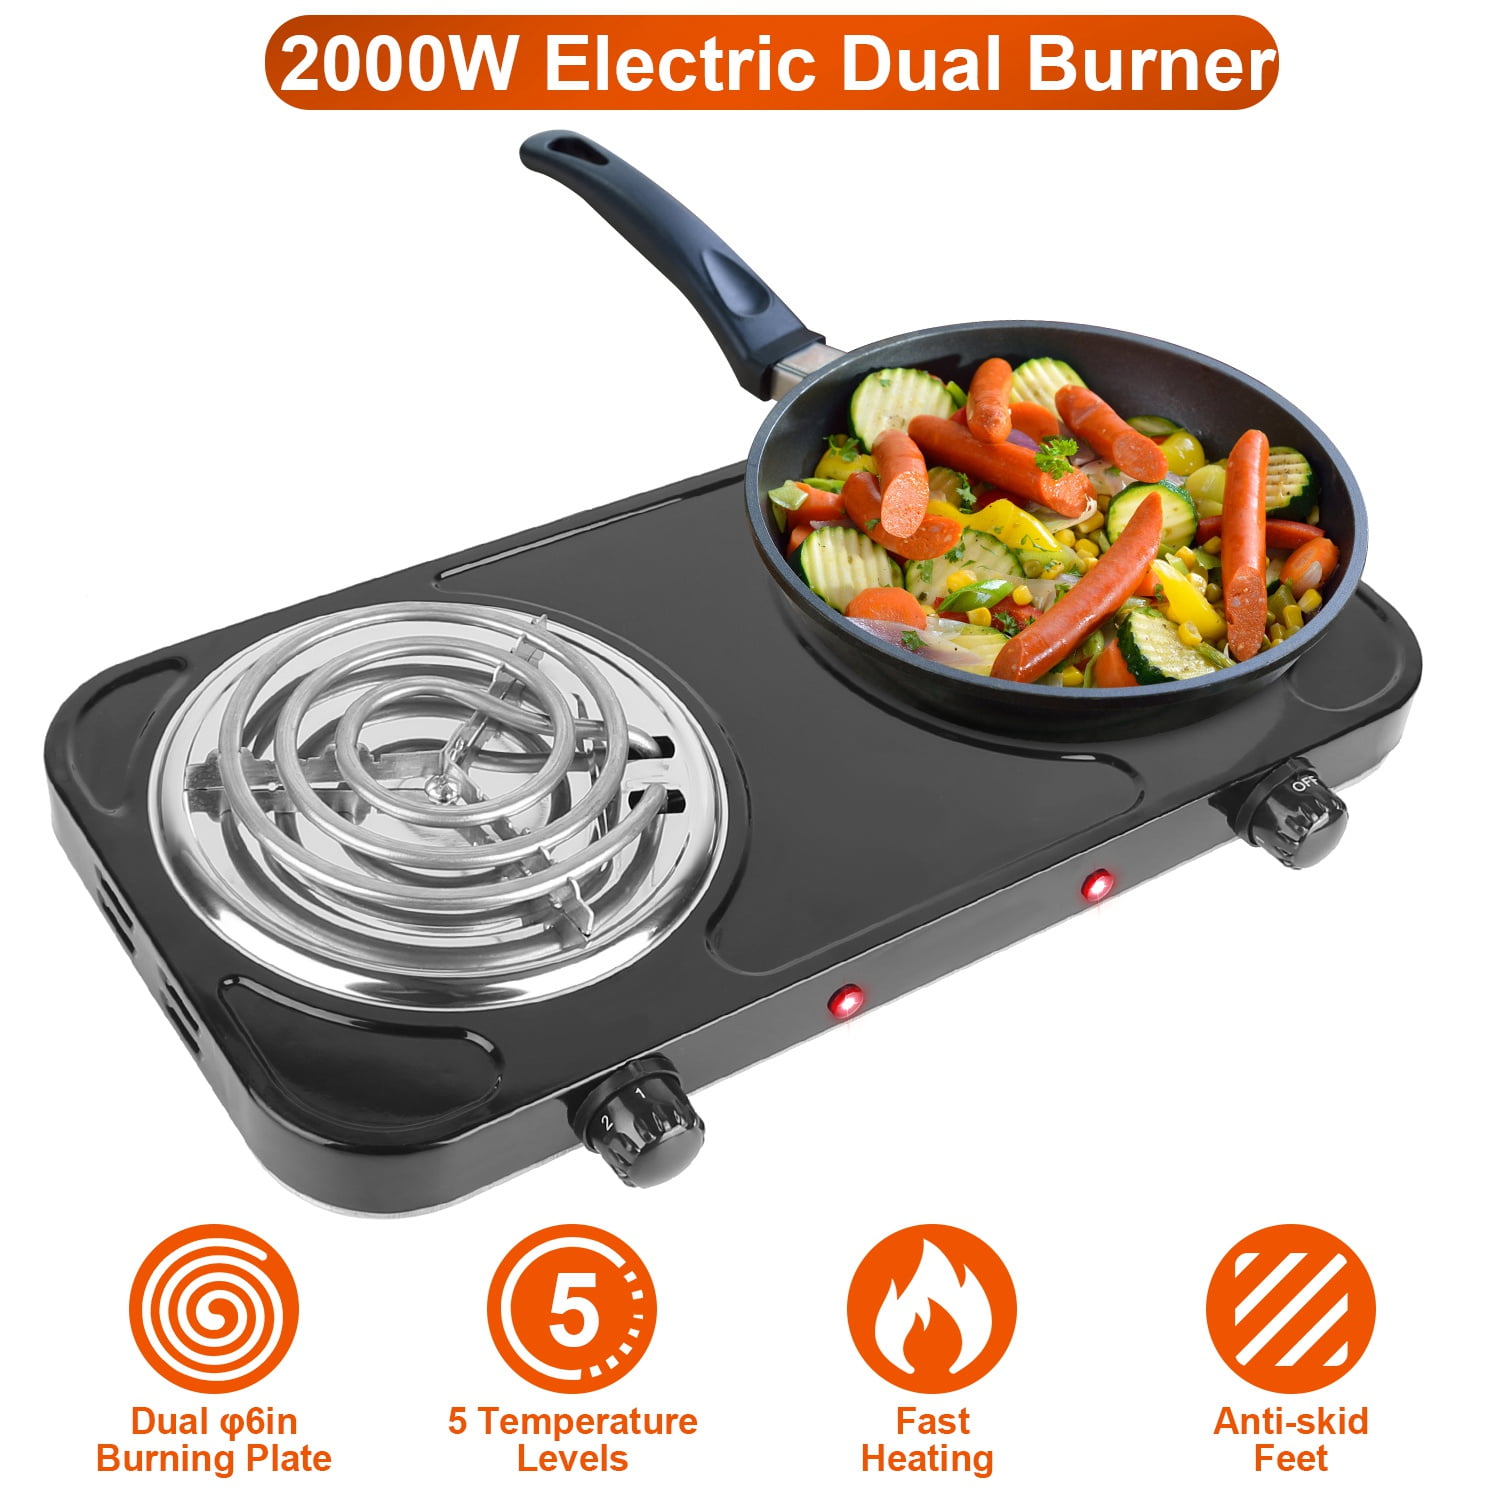 1500W Electric Single Burner, iMounTEK Portable Heating Hot Plate Stove  Countertop RV Hotplate with Non Slip Rubber Feet 5 Temperature Adjustments,  Black 